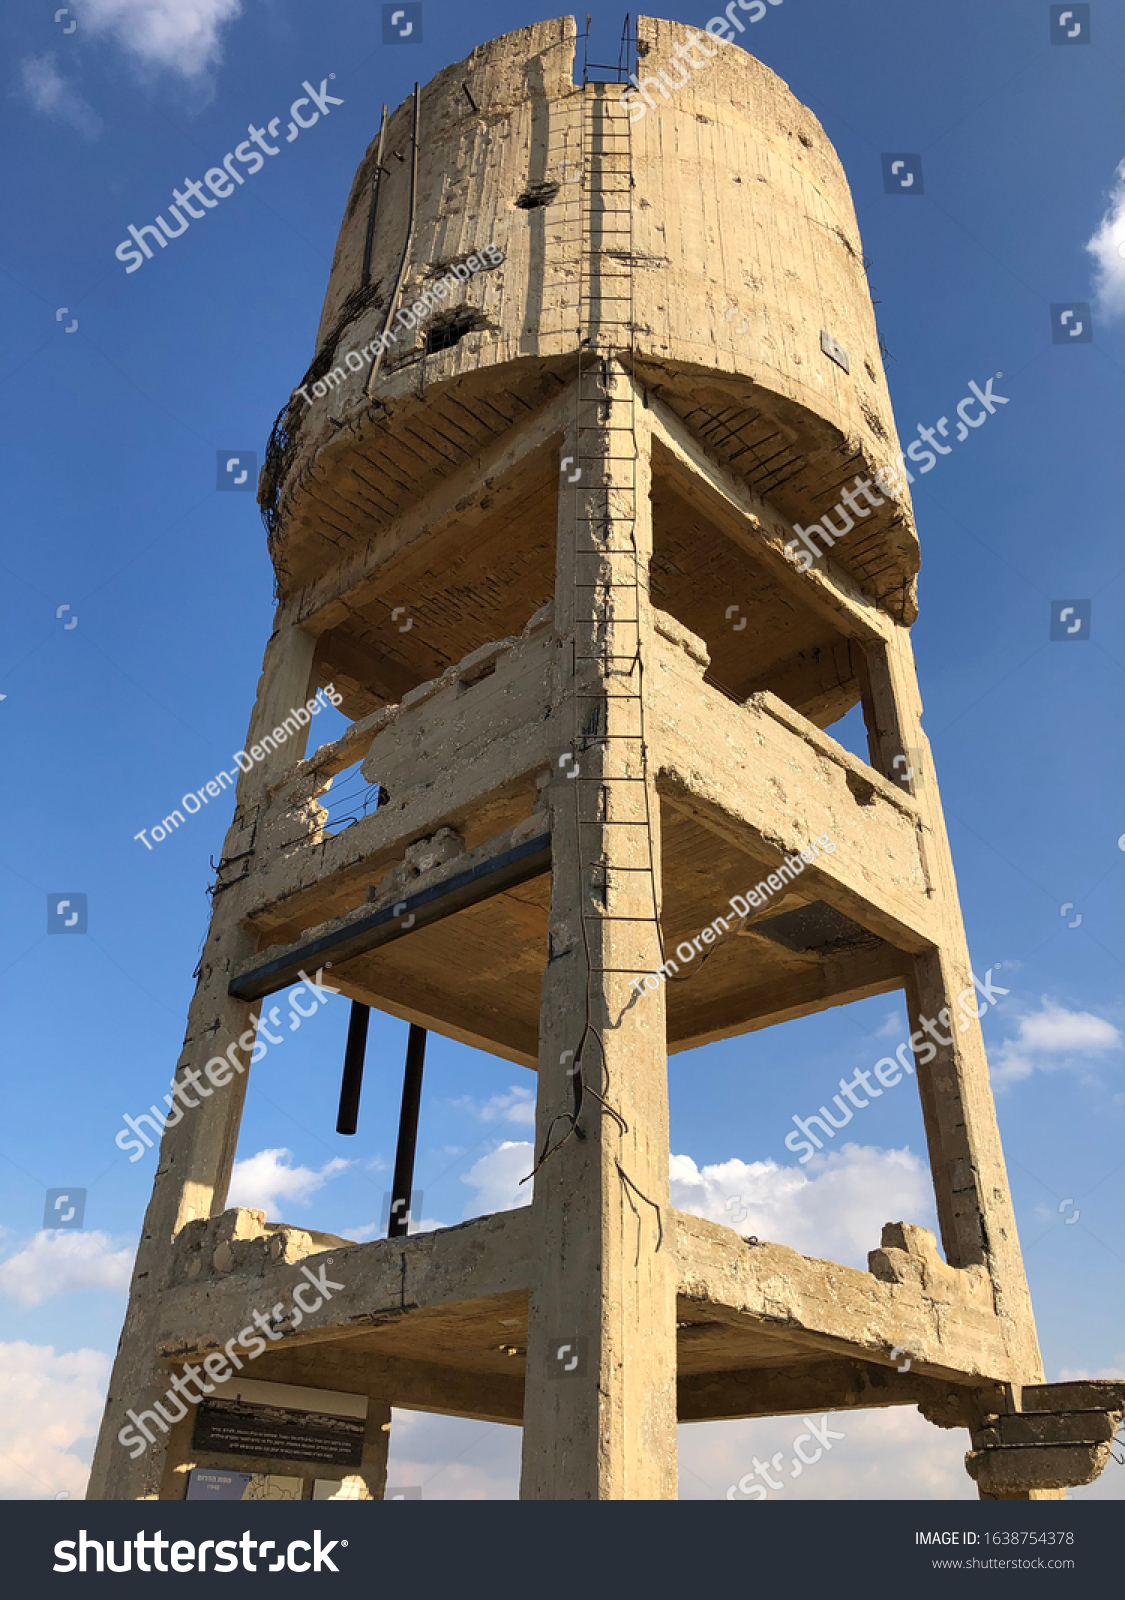 The old Water Tower of Be'erot Yitzhak in Israel. #1638754378